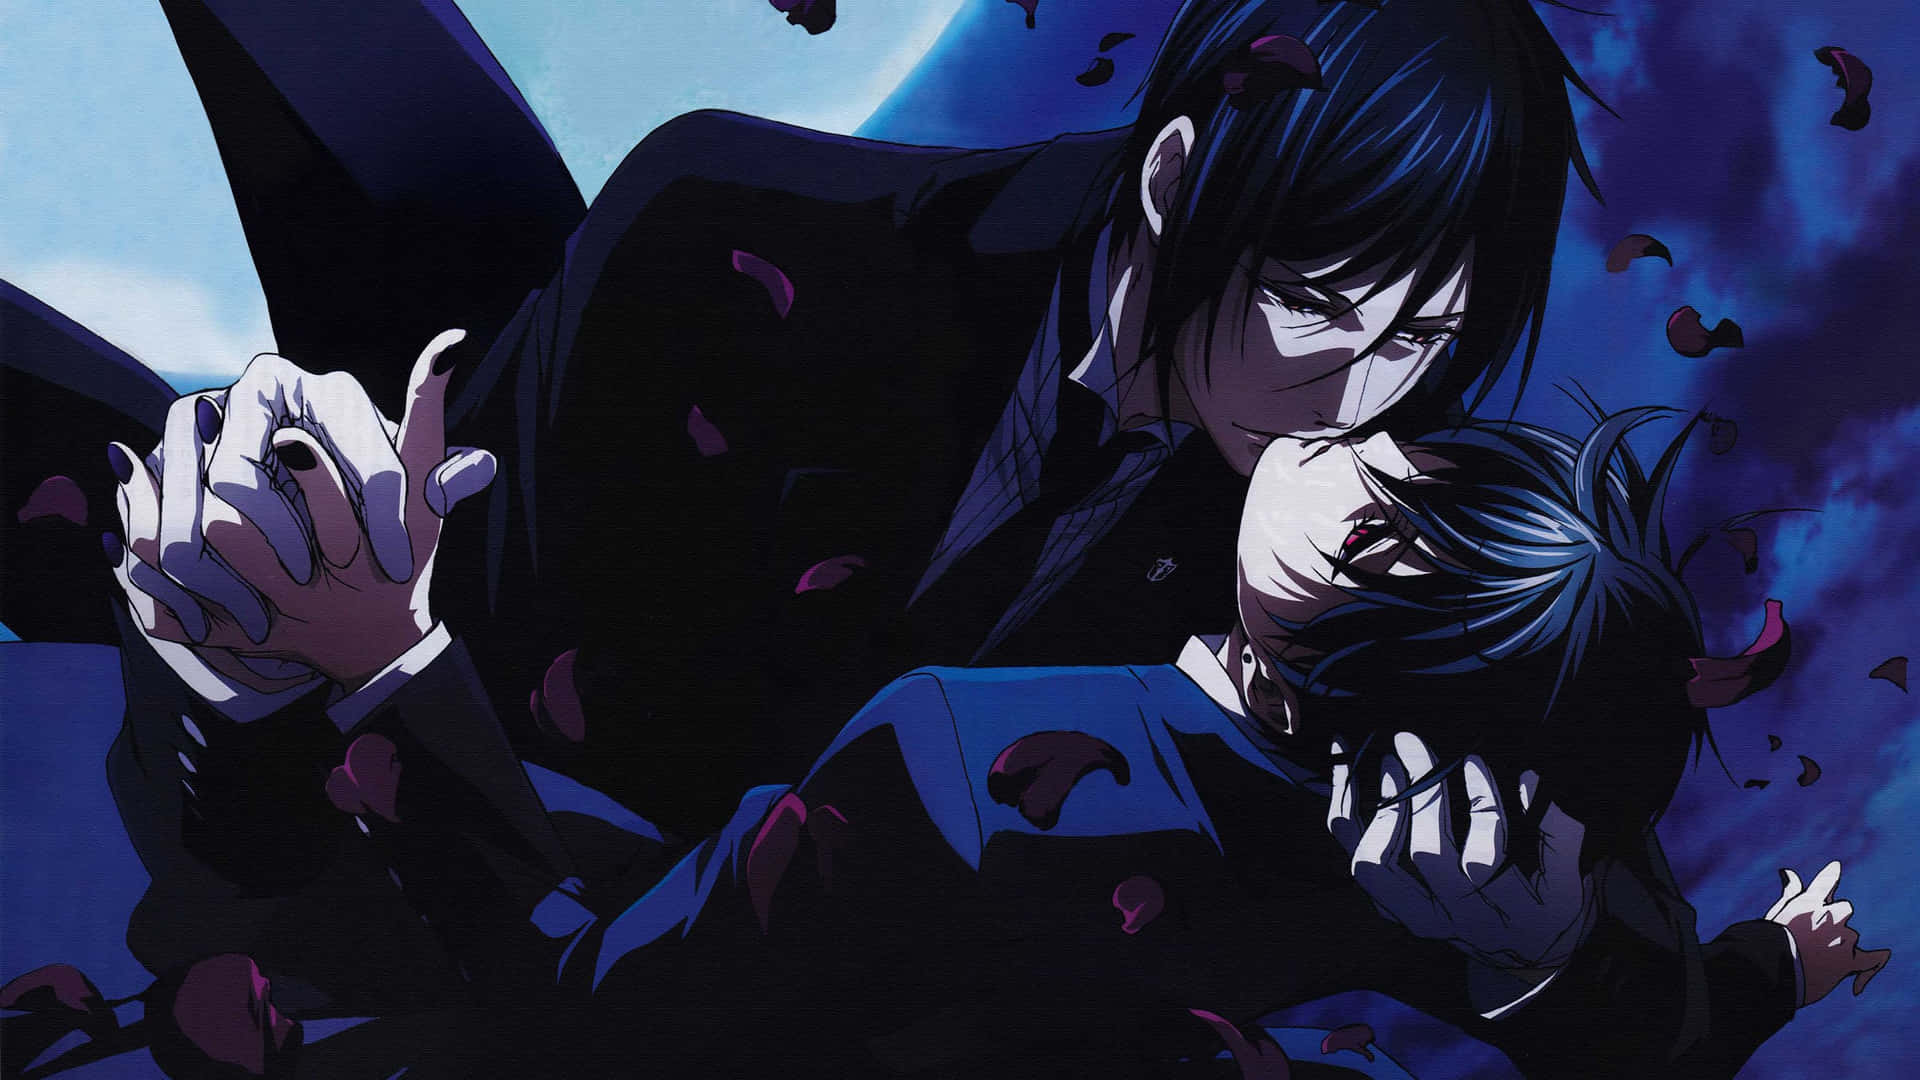 The story of Ciel and Sebastian in Black Butler